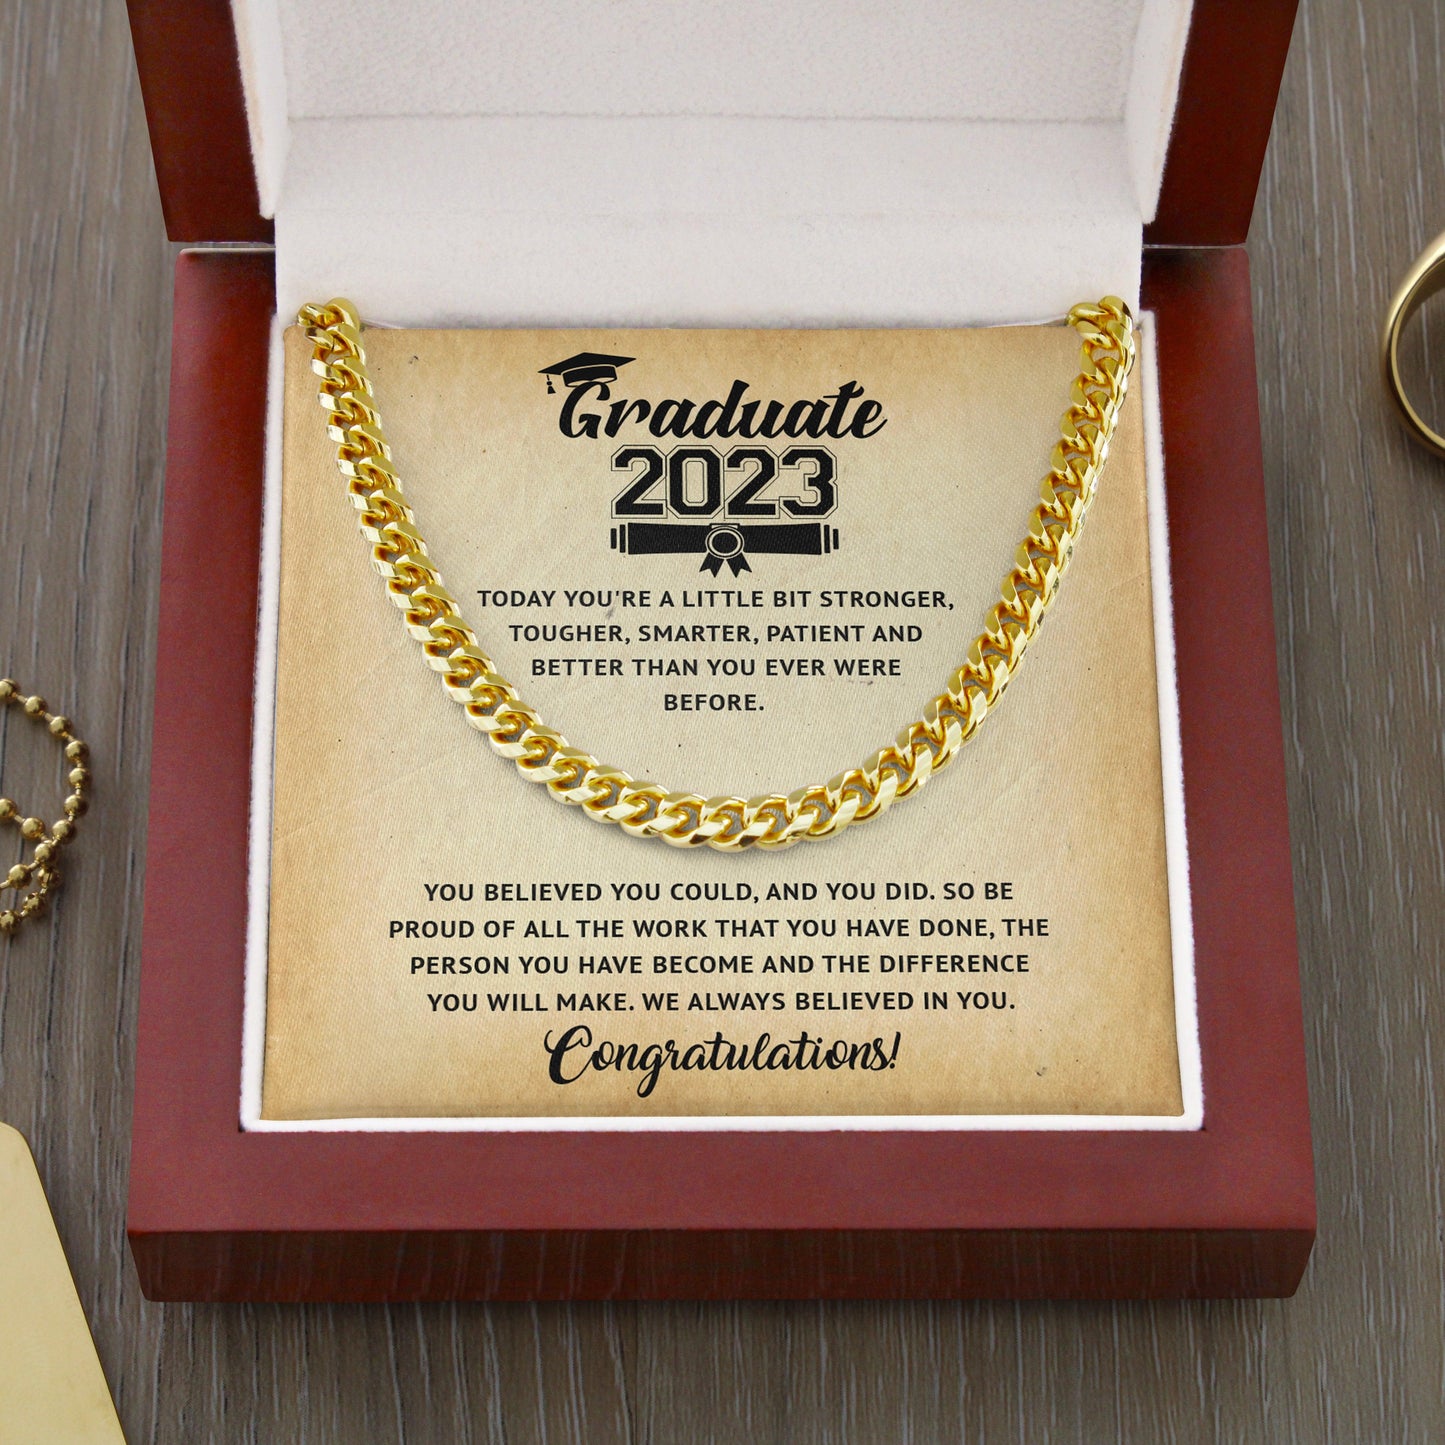 Jewelry gifts Graduation 2023 - New Horizonts - Cuban Link Chain - Belesmé - Memorable Jewelry Gifts 